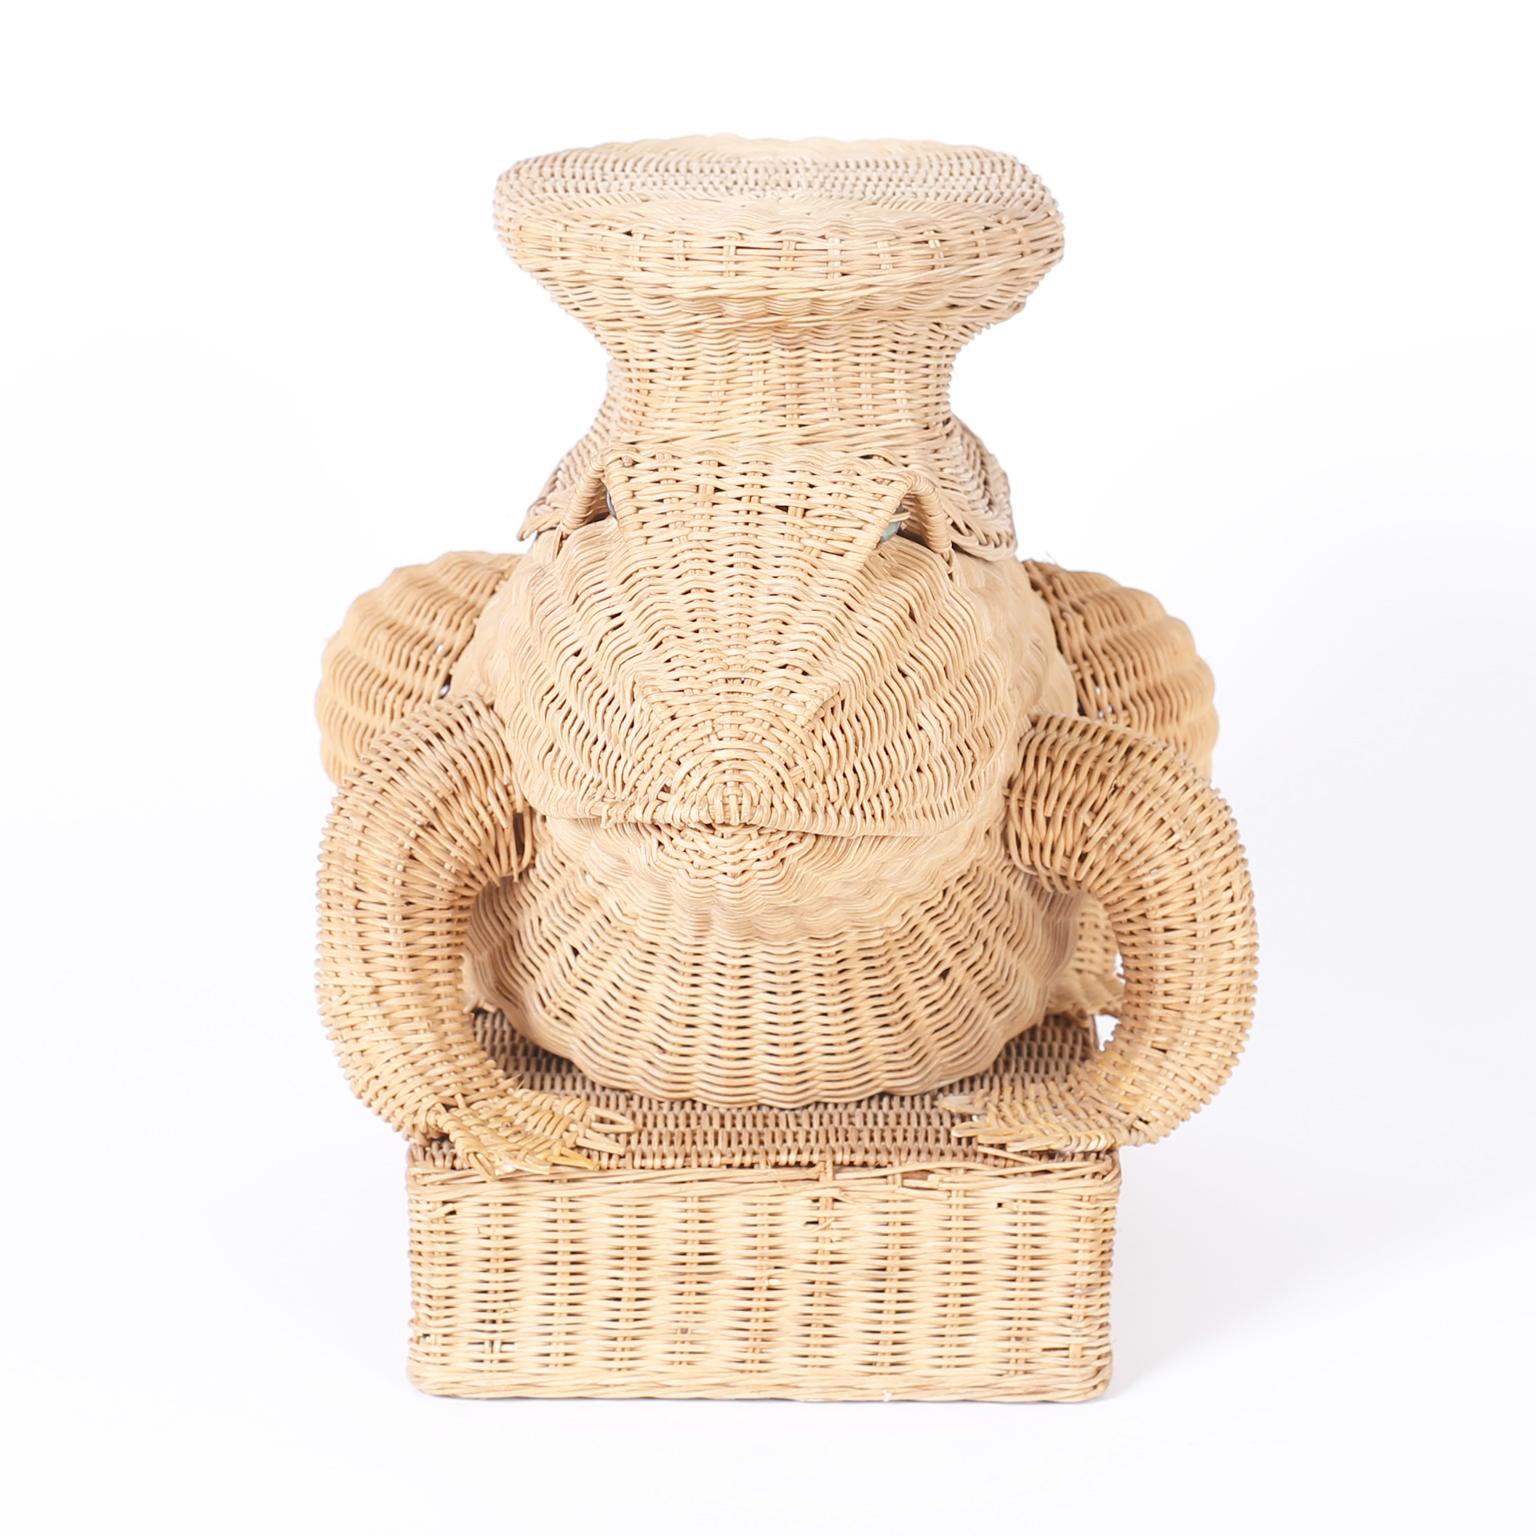 American Midcentury Wicker Frog Stand or Seat